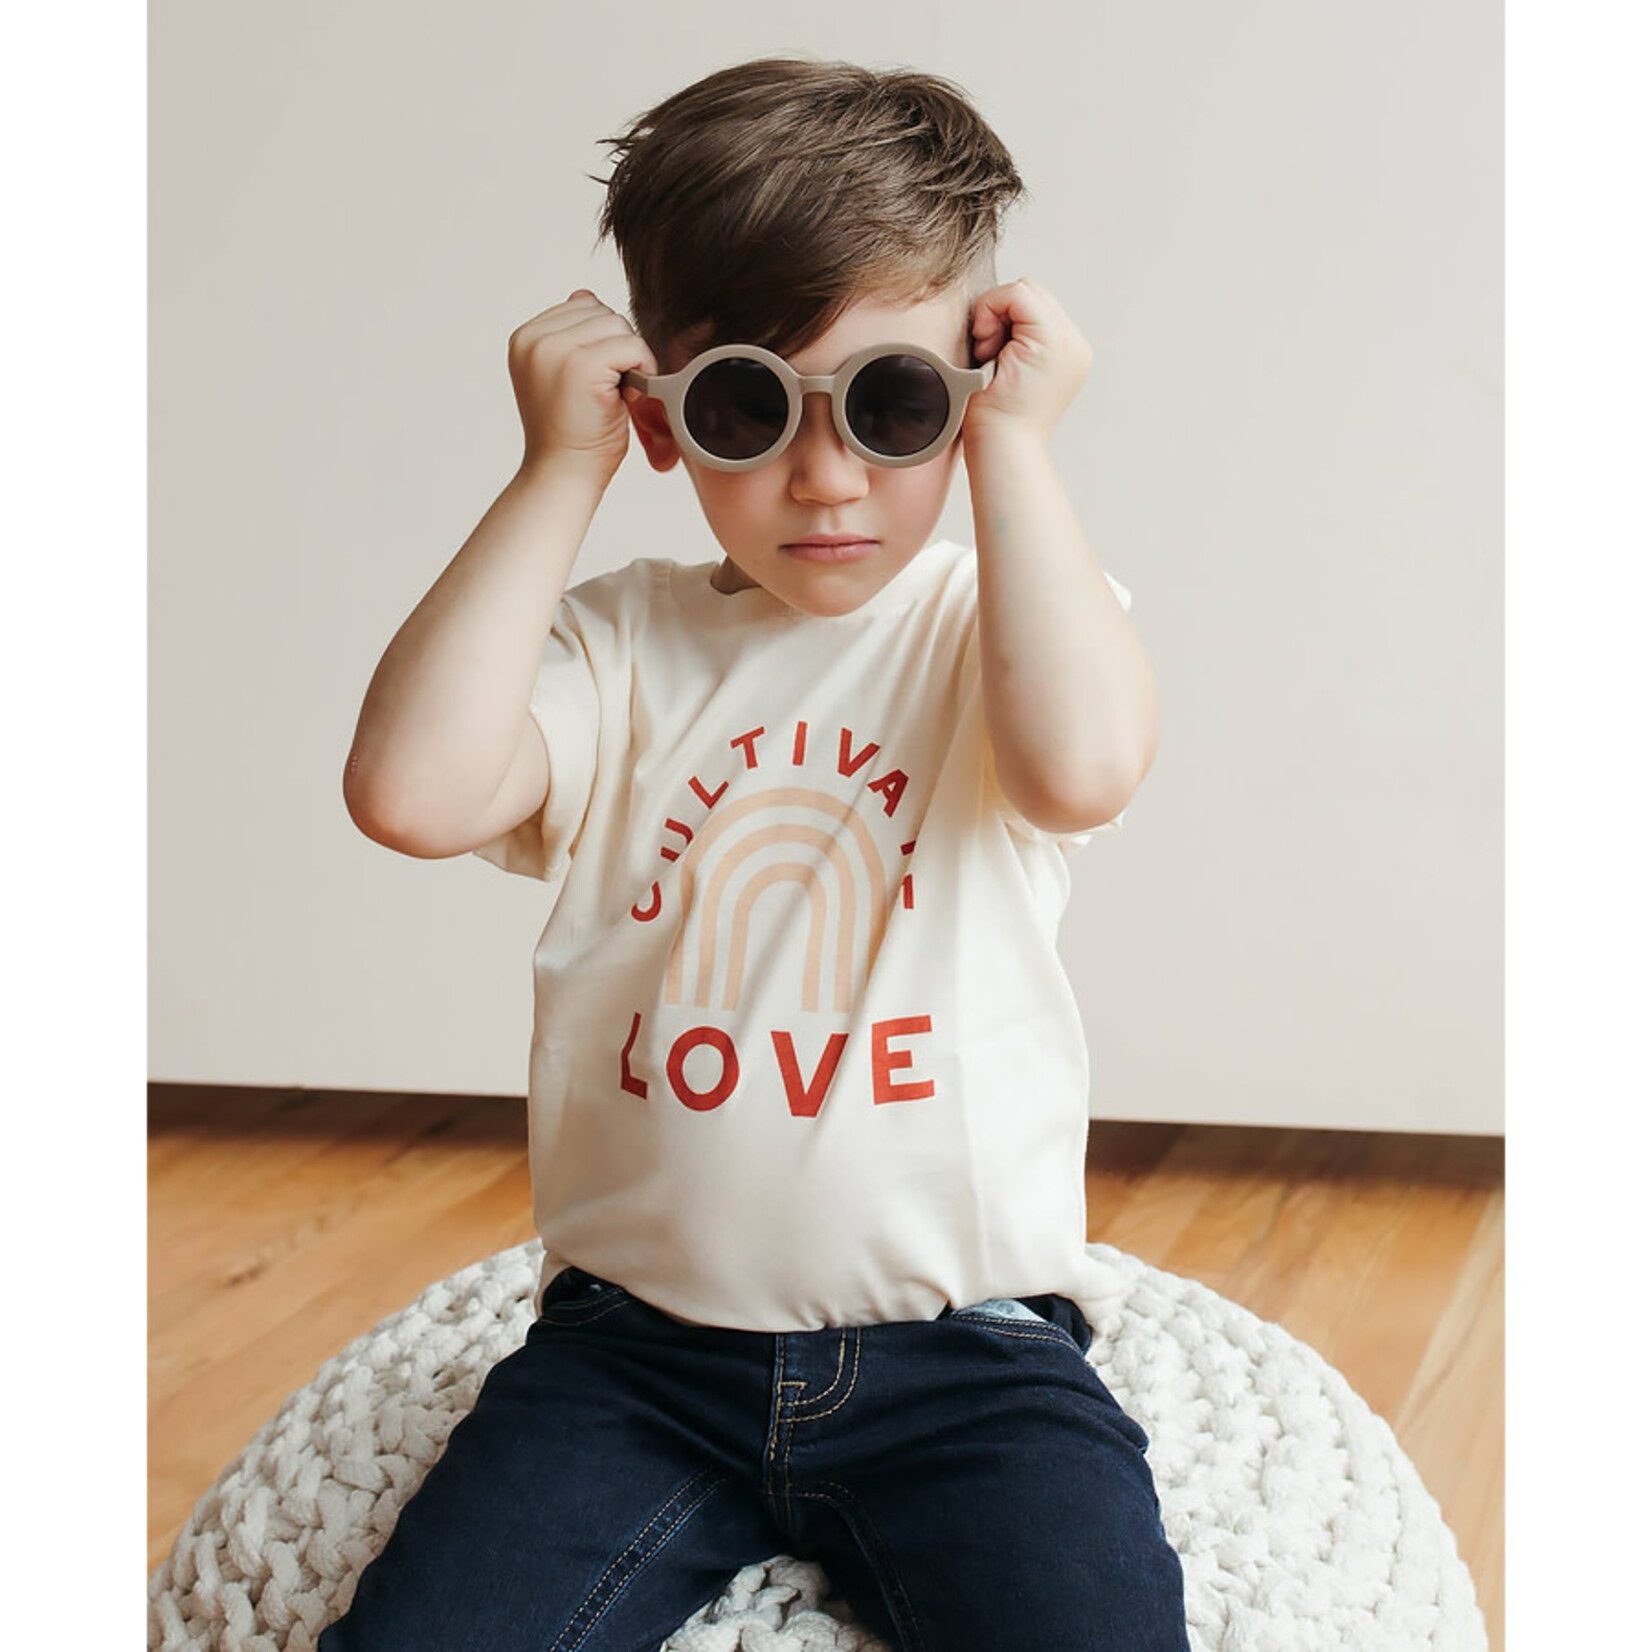 Polished Prints Cultivate Love Toddler Tee